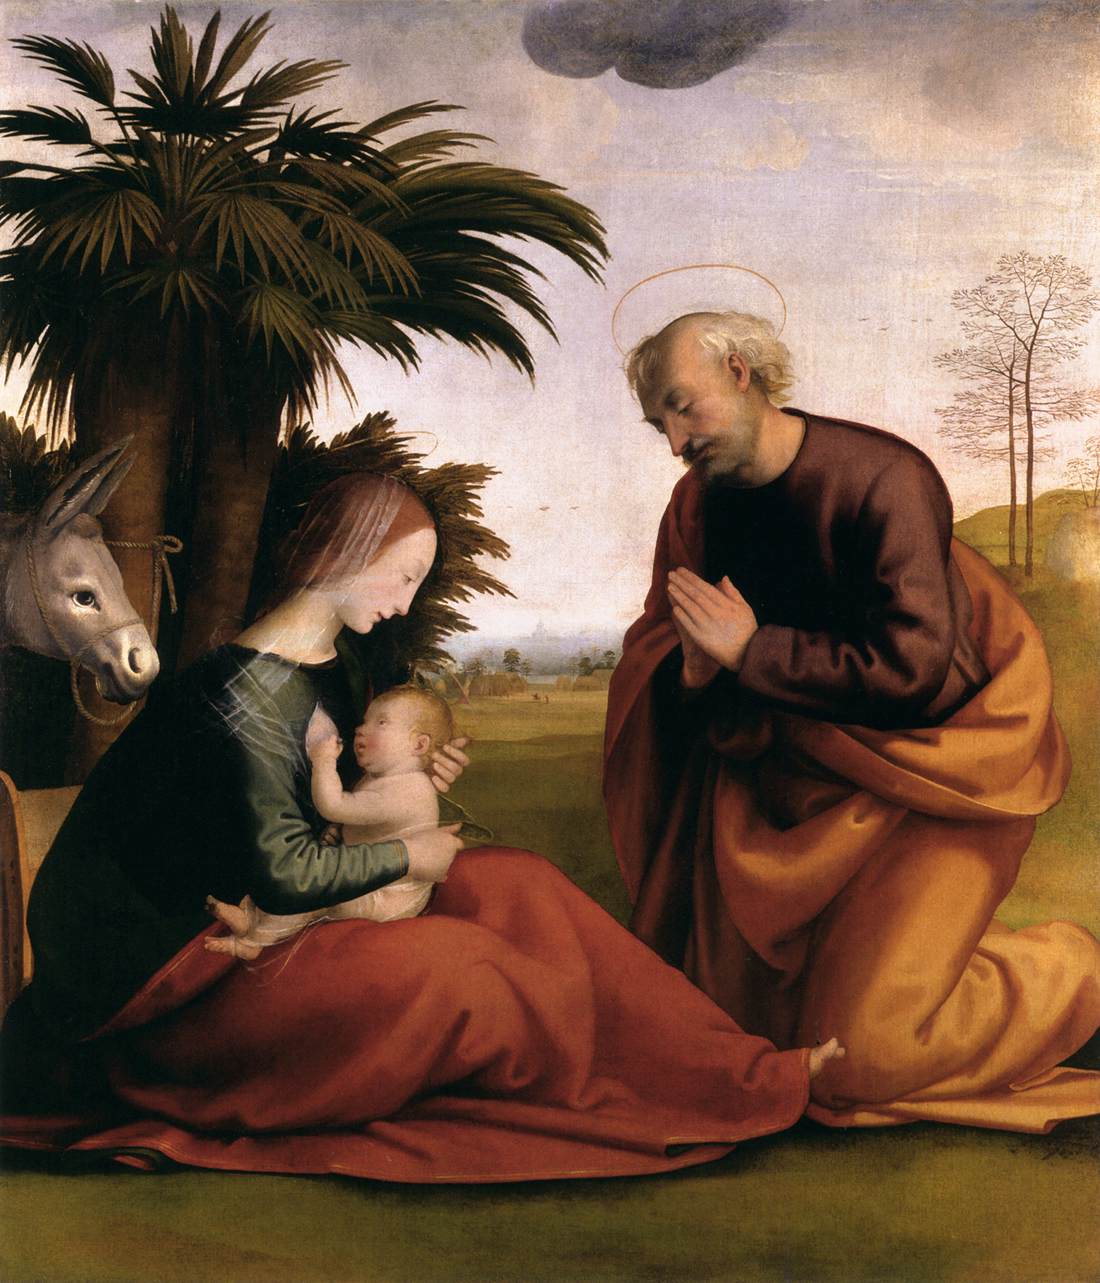 Rest in Flight to Egypt